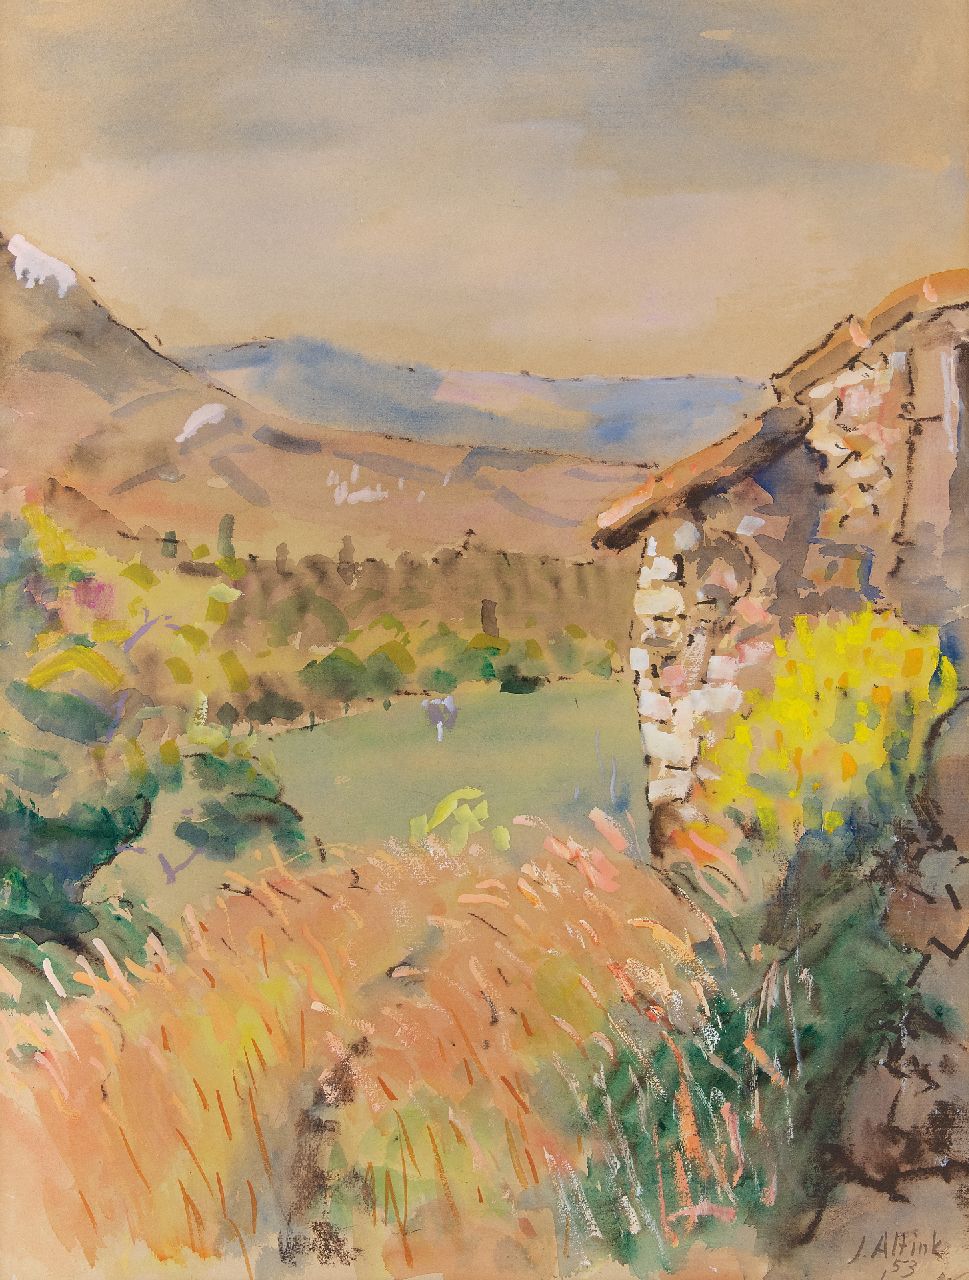 Altink J.  | Jan Altink, Abandoned farm in France, tempera on paper 63.0 x 47.5 cm, signed l.r. and dated '53